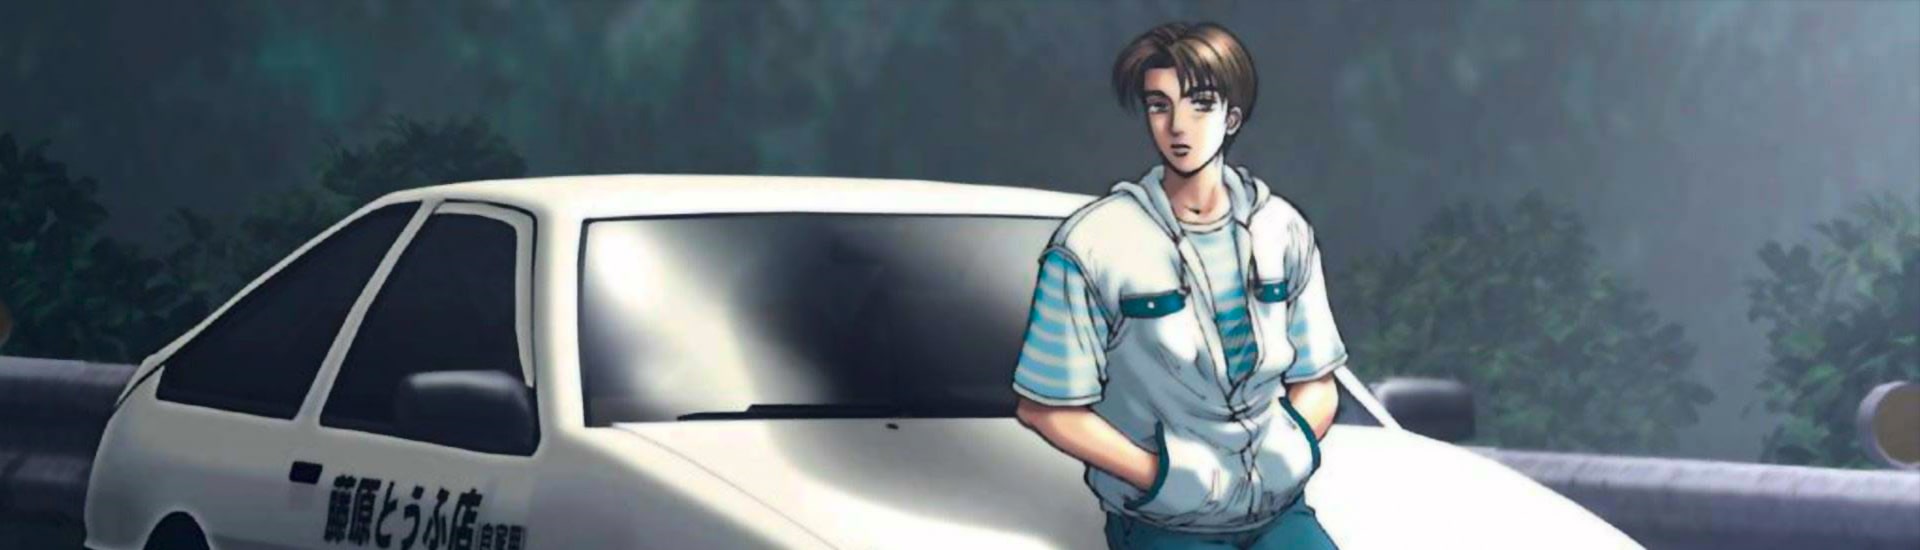 Initial d battle stage dublado - COMPLETO 